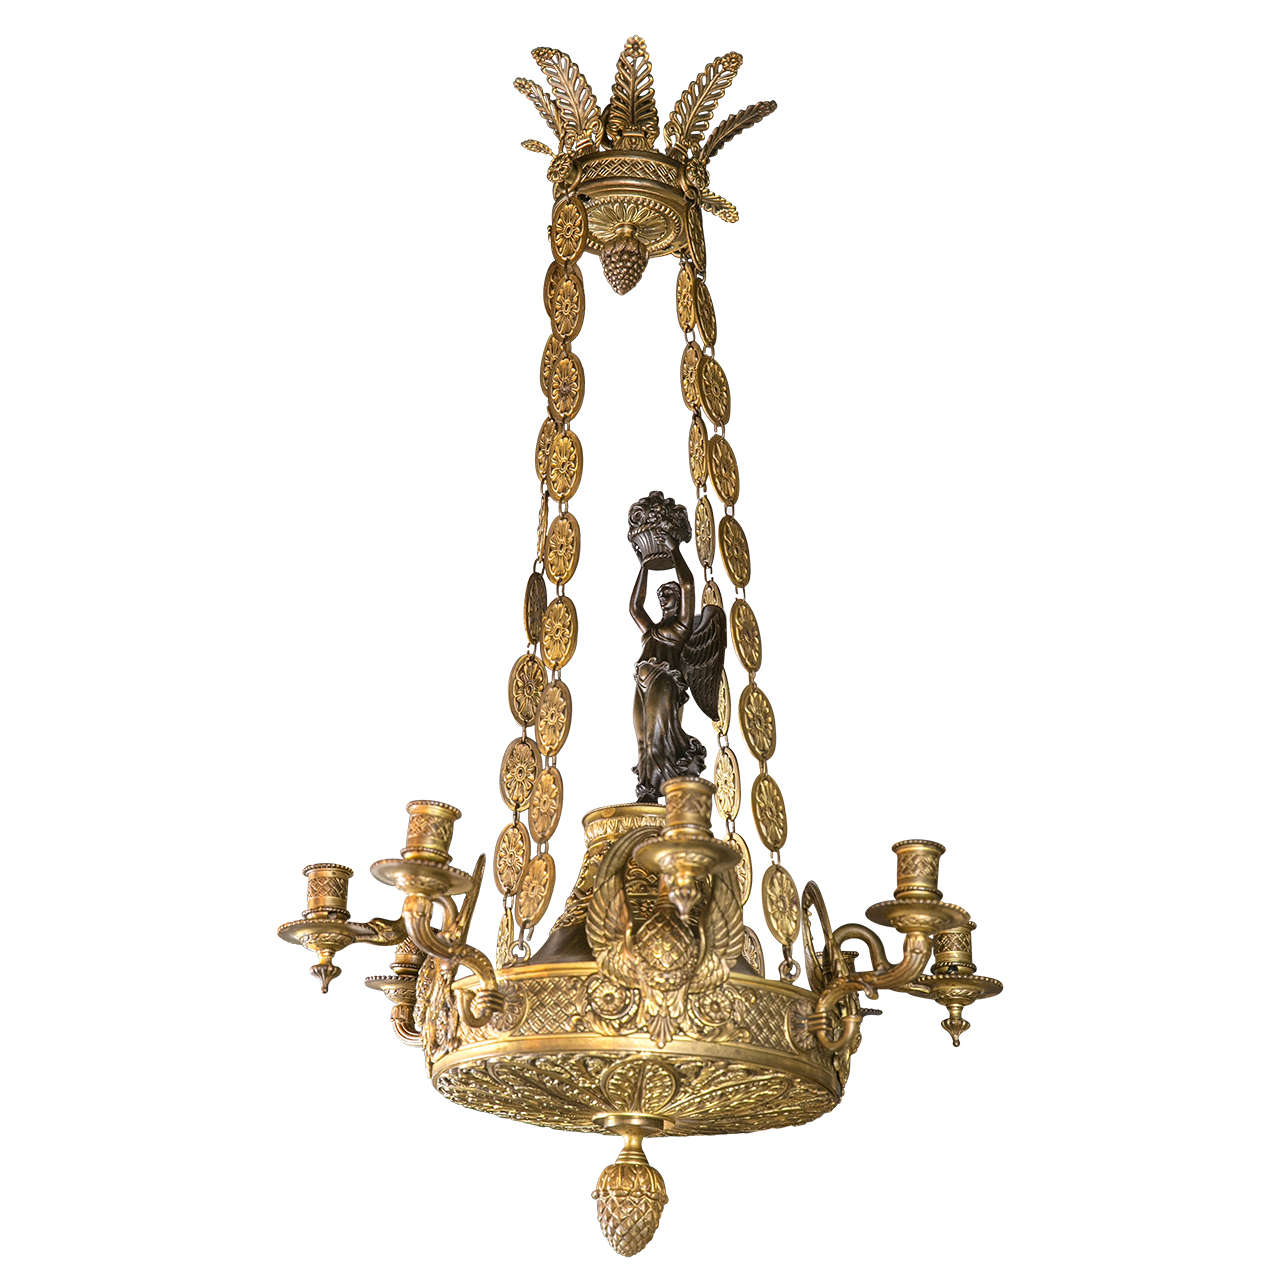 19th Century French Empire Chandelier For Sale